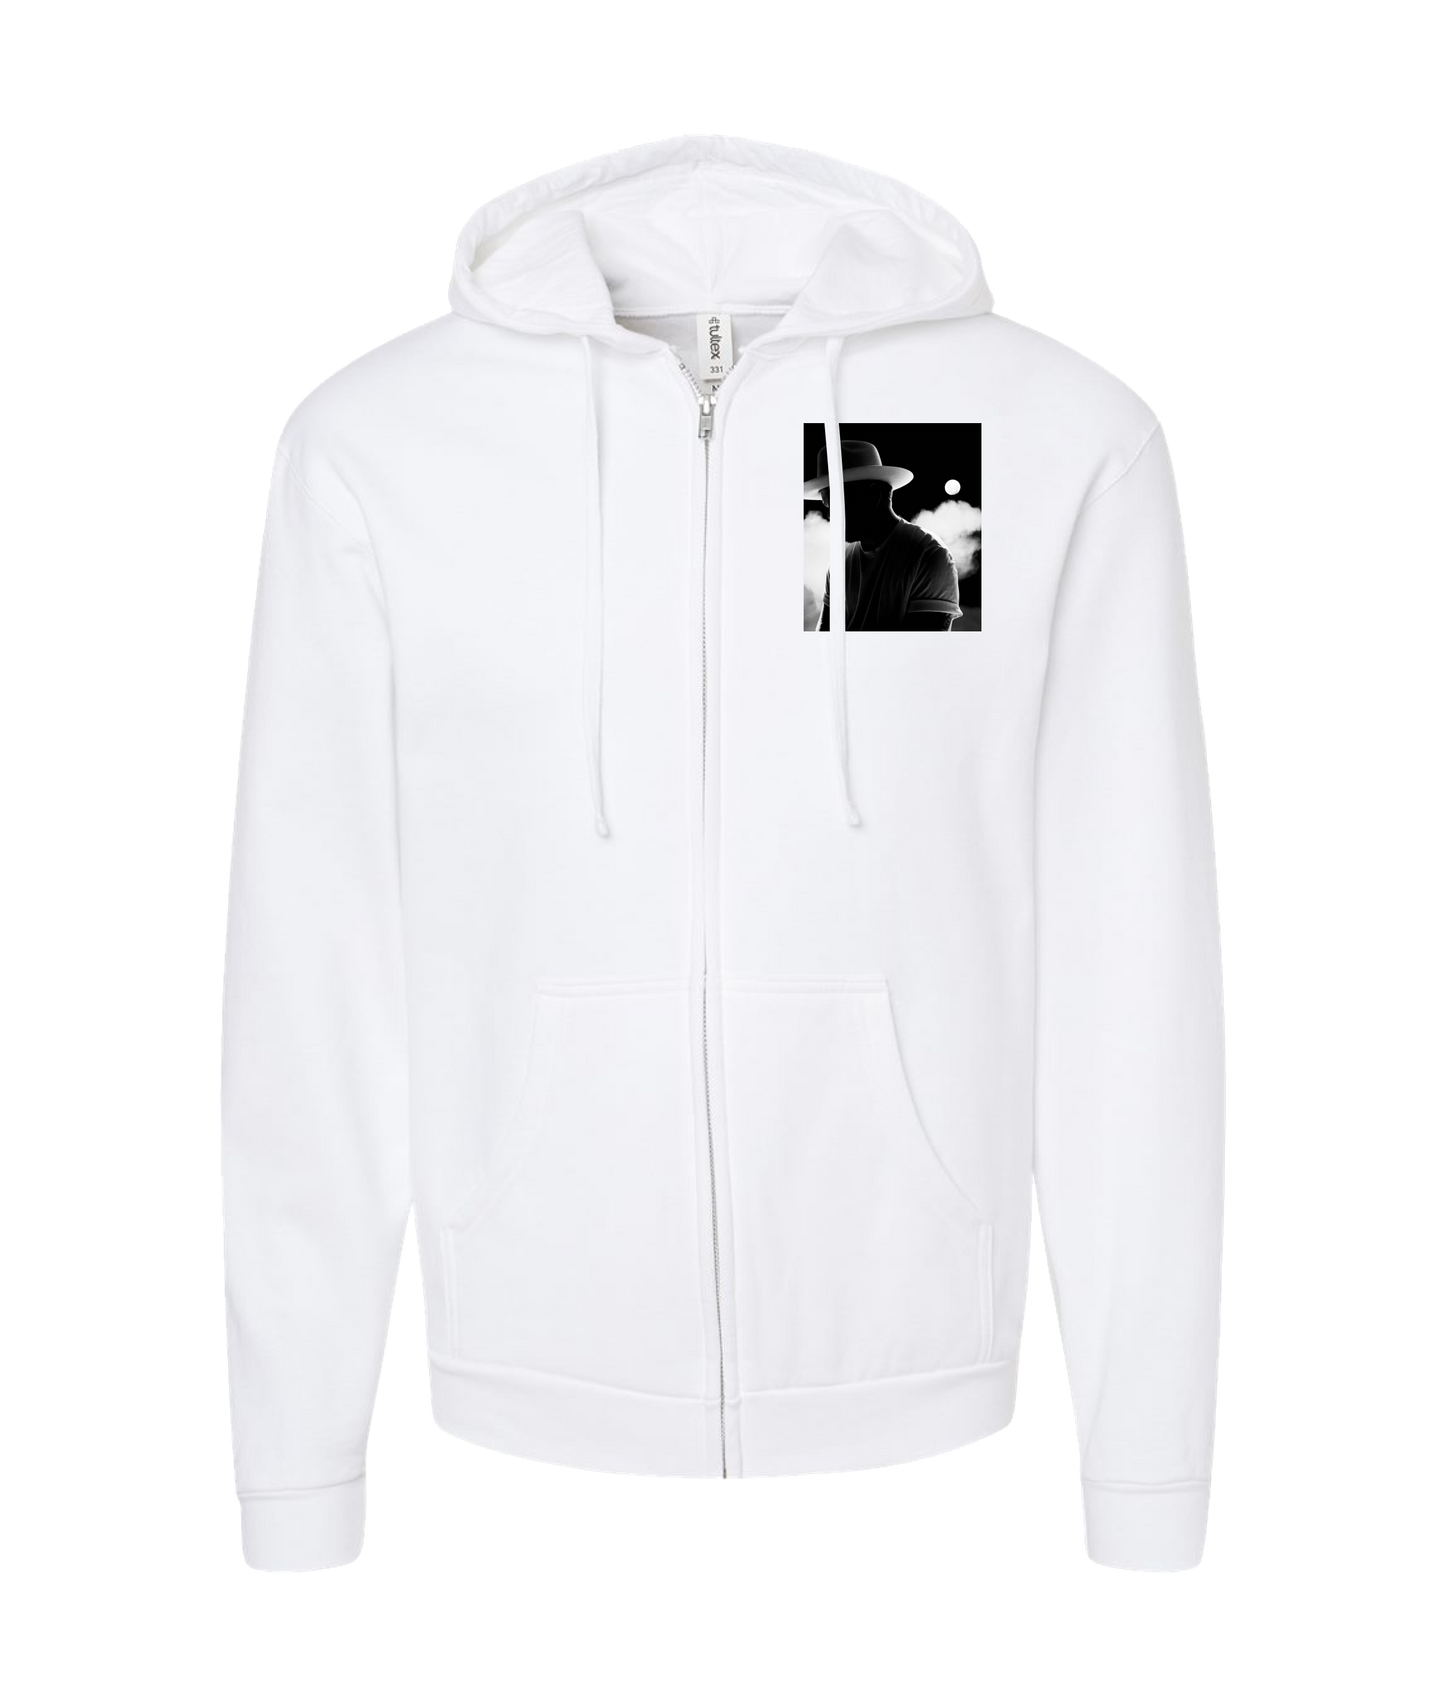 Andy Crosby Music - Holy Vices - White Zip Up Hoodie